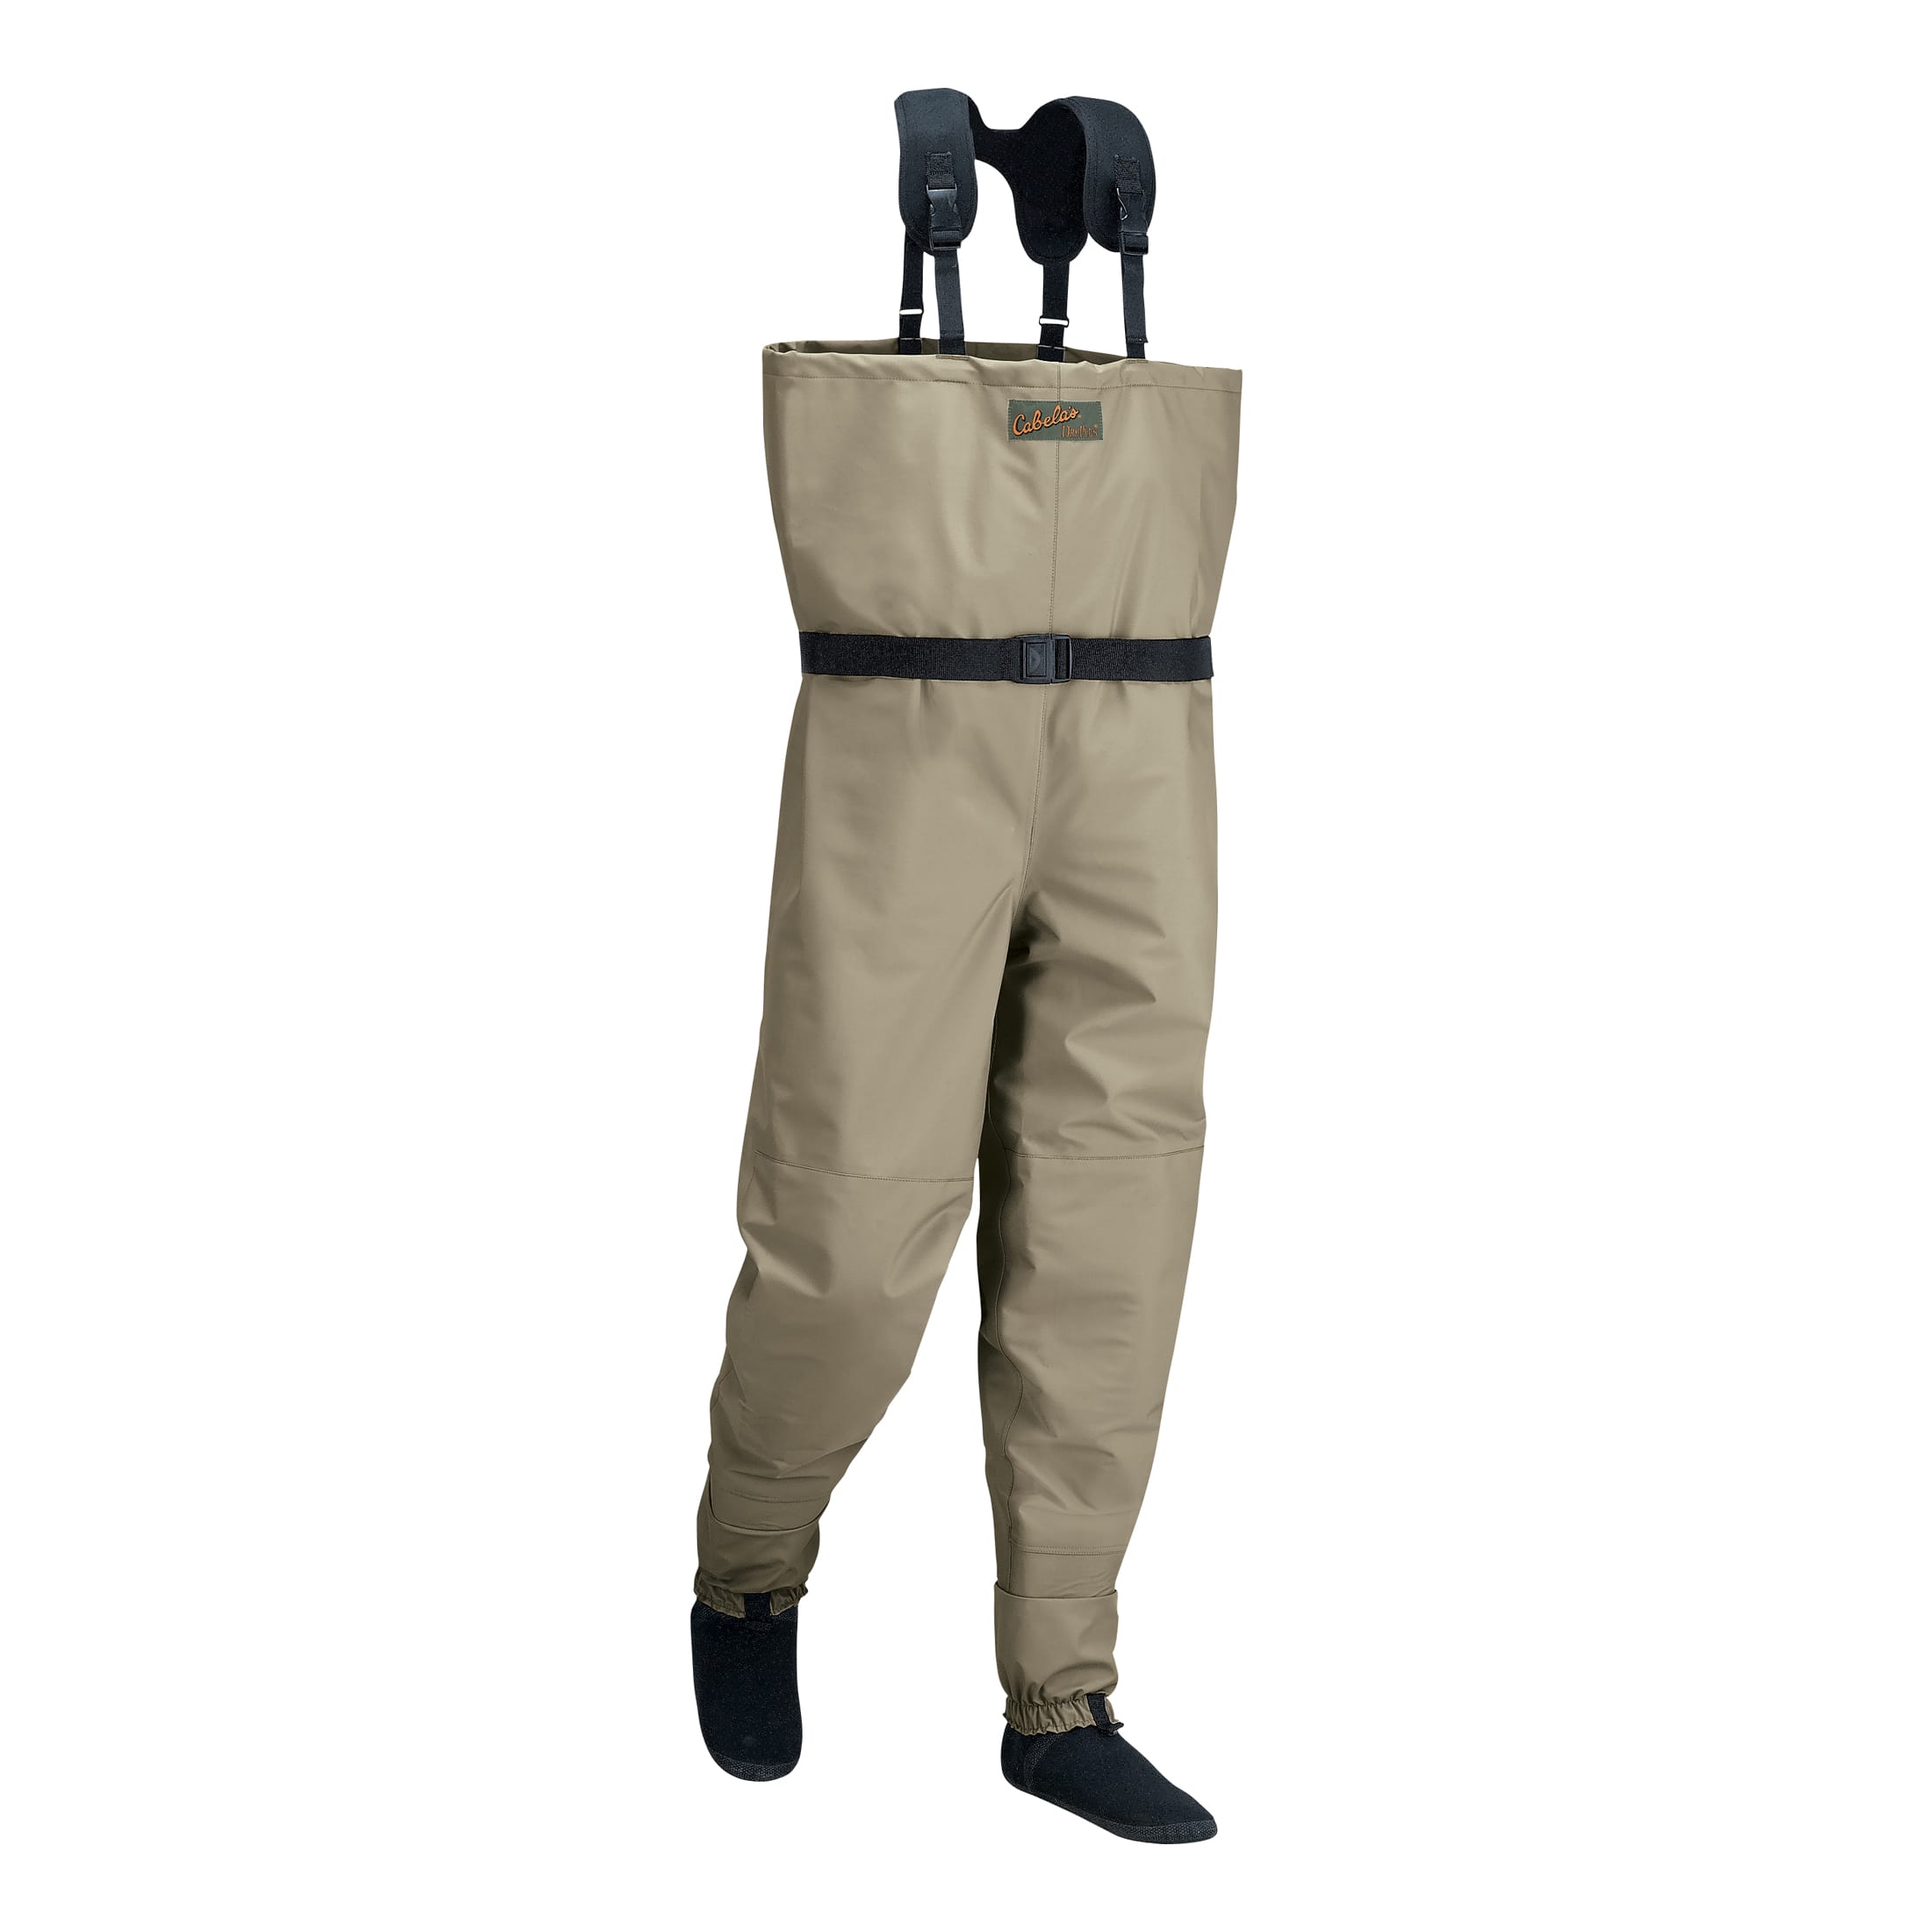 Cabela's Premium Breathable Stockingfoot Waders with 4MOST DRY-PLUS® - Tall